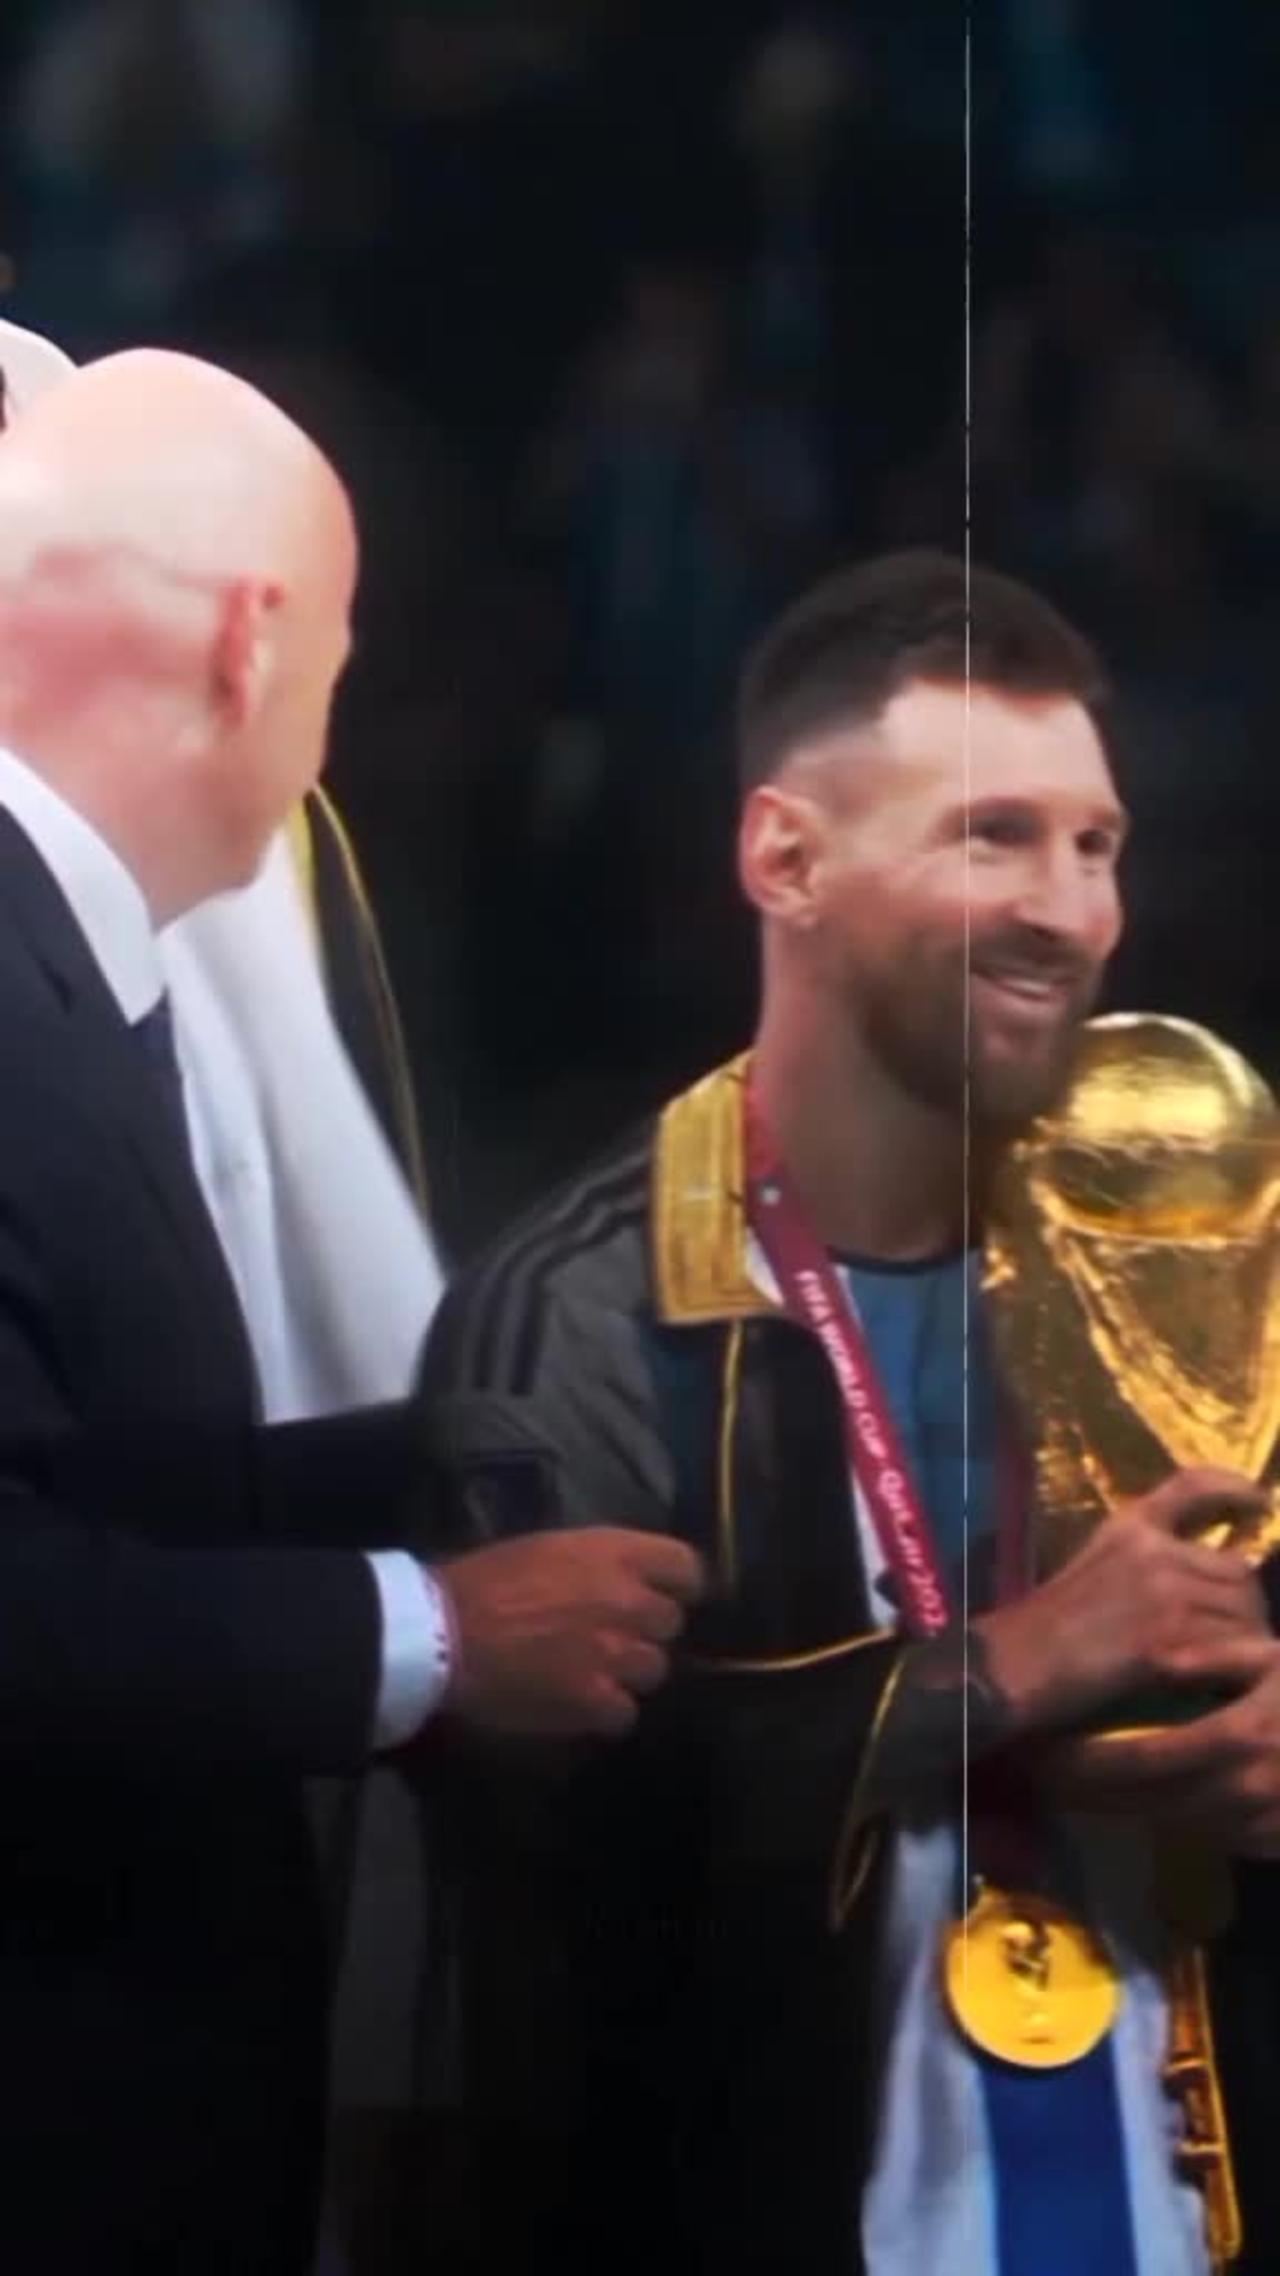 Lionel Messi lifting worldcup trophy 🏆